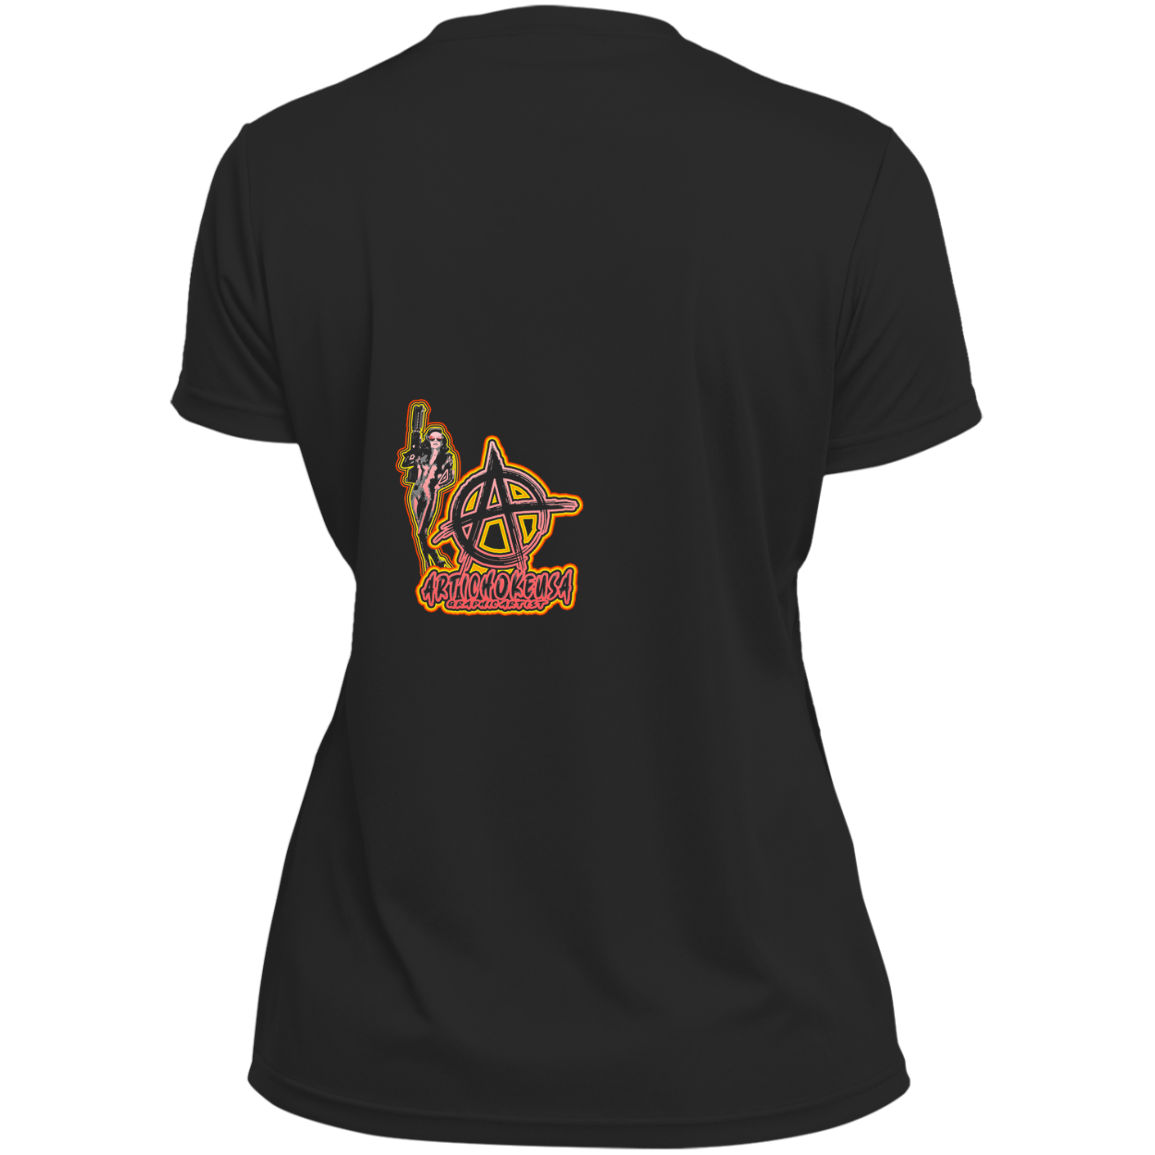 ArtichokeUSA Character and Font design. Let's Create Your Own Team Design Today. Mary Boom Boom. Ladies’ Moisture-Wicking V-Neck Tee